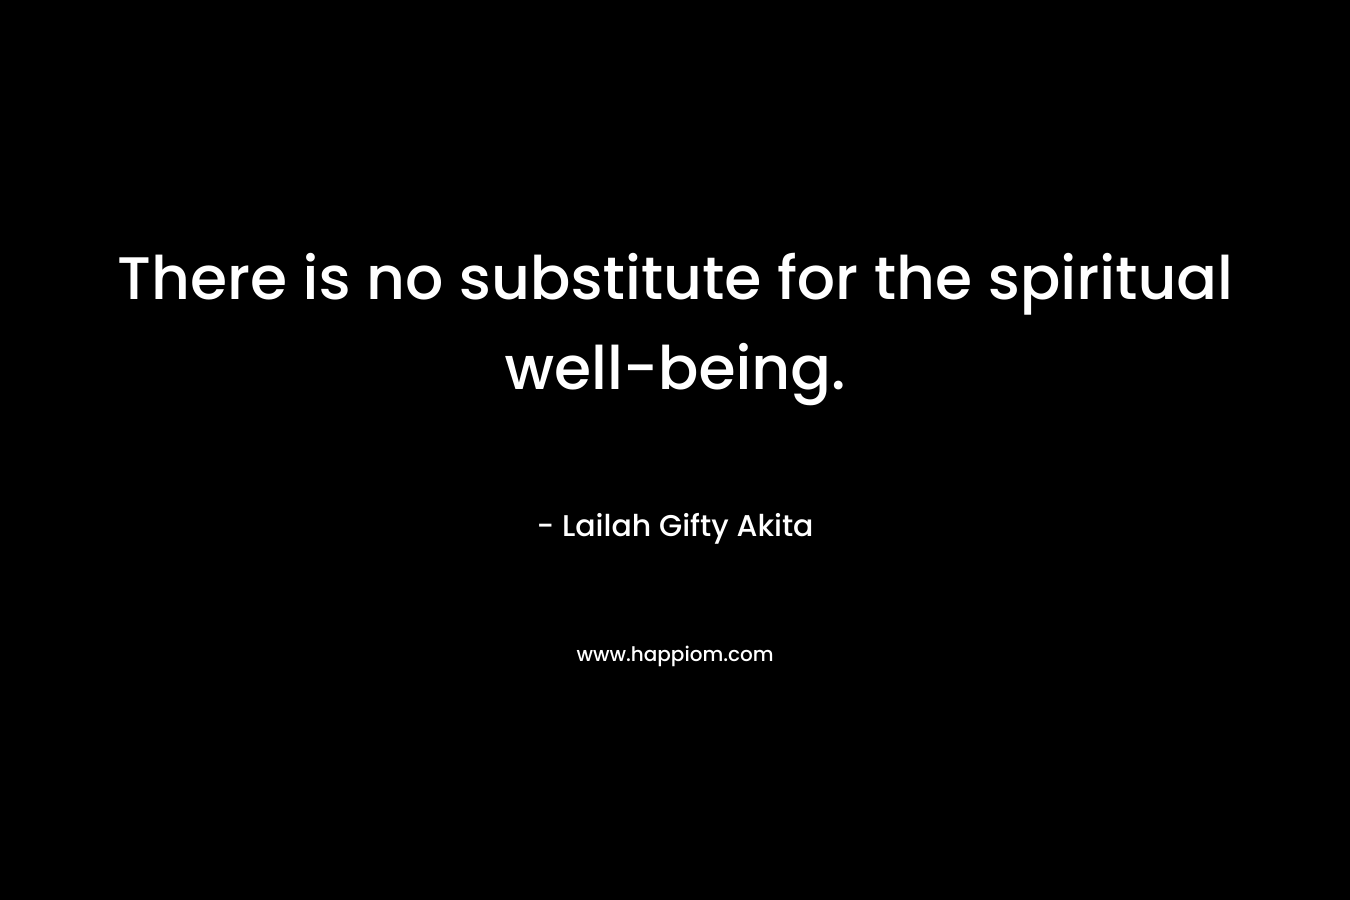 There is no substitute for the spiritual well-being.